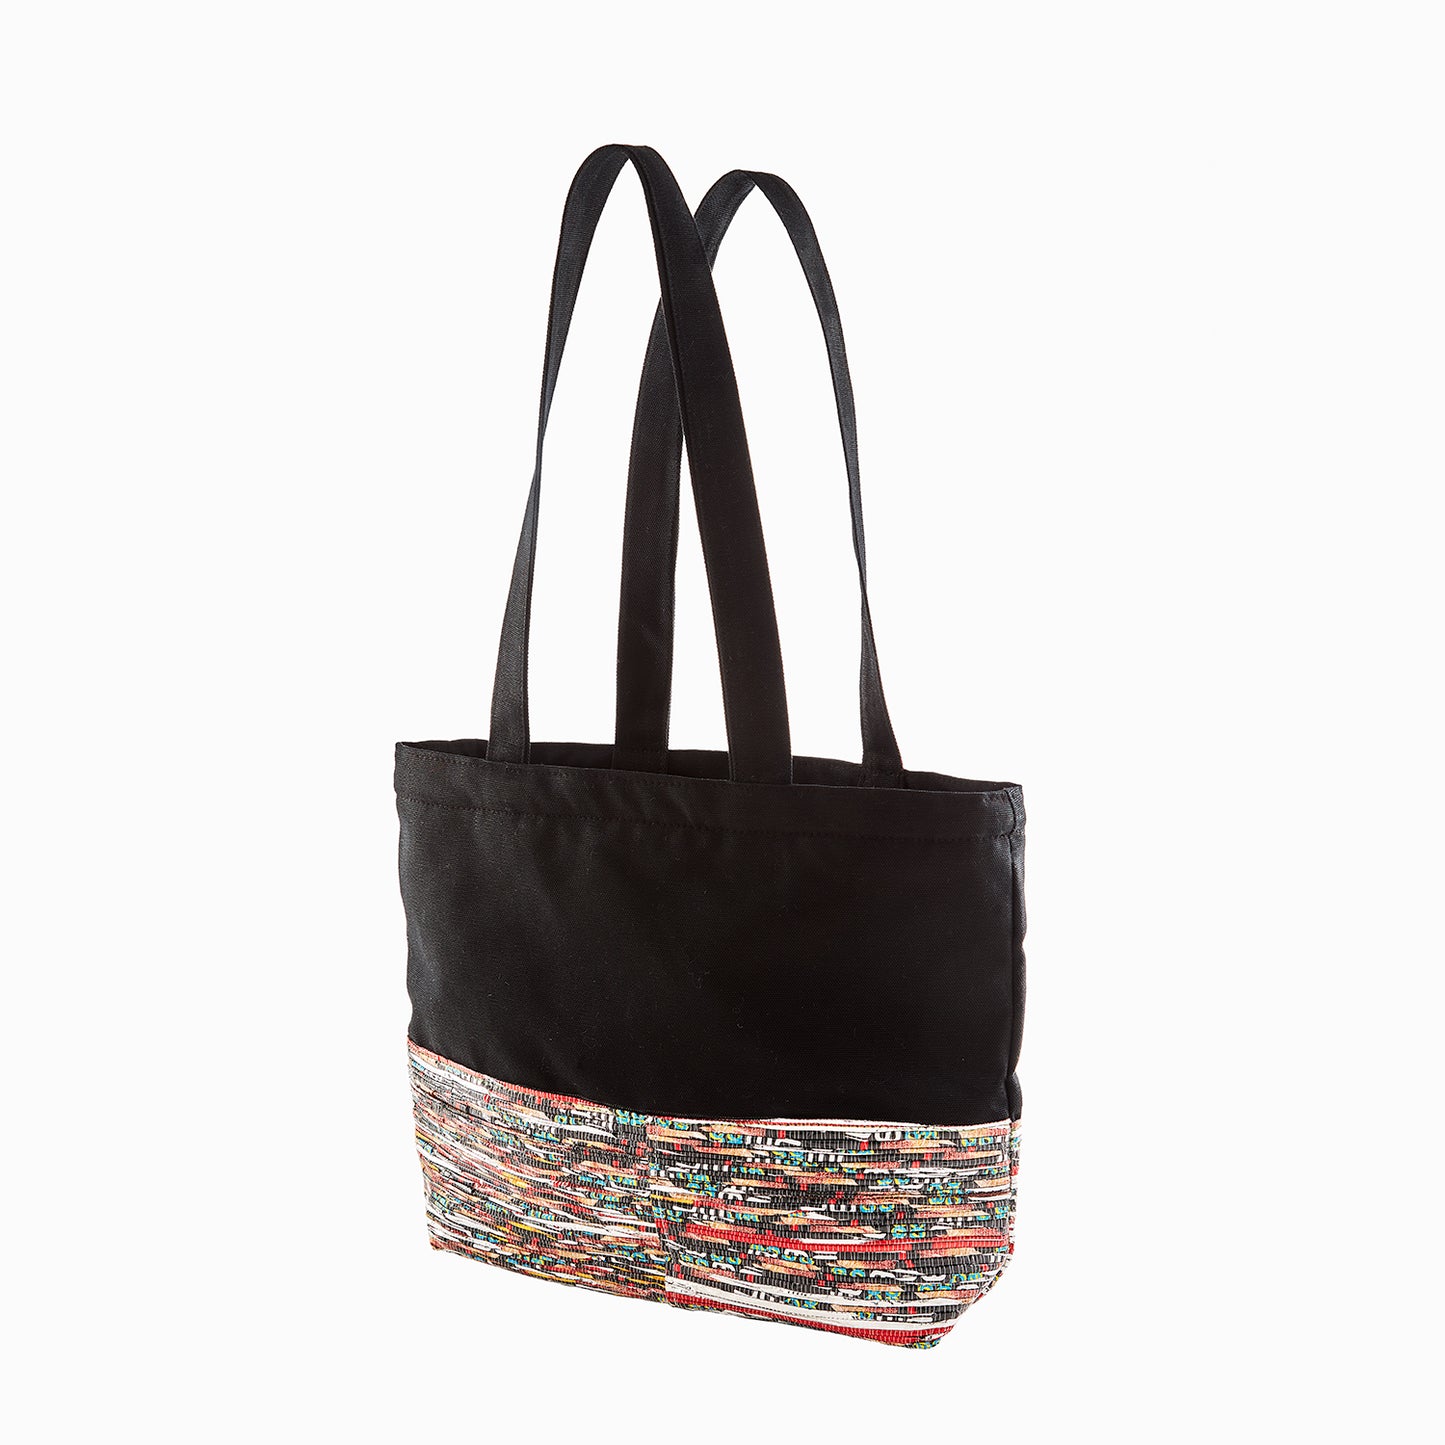 Black Canvas Bag with Multi-colored (Waste Plastic) bottom lining; on - SUPER SALE!!!